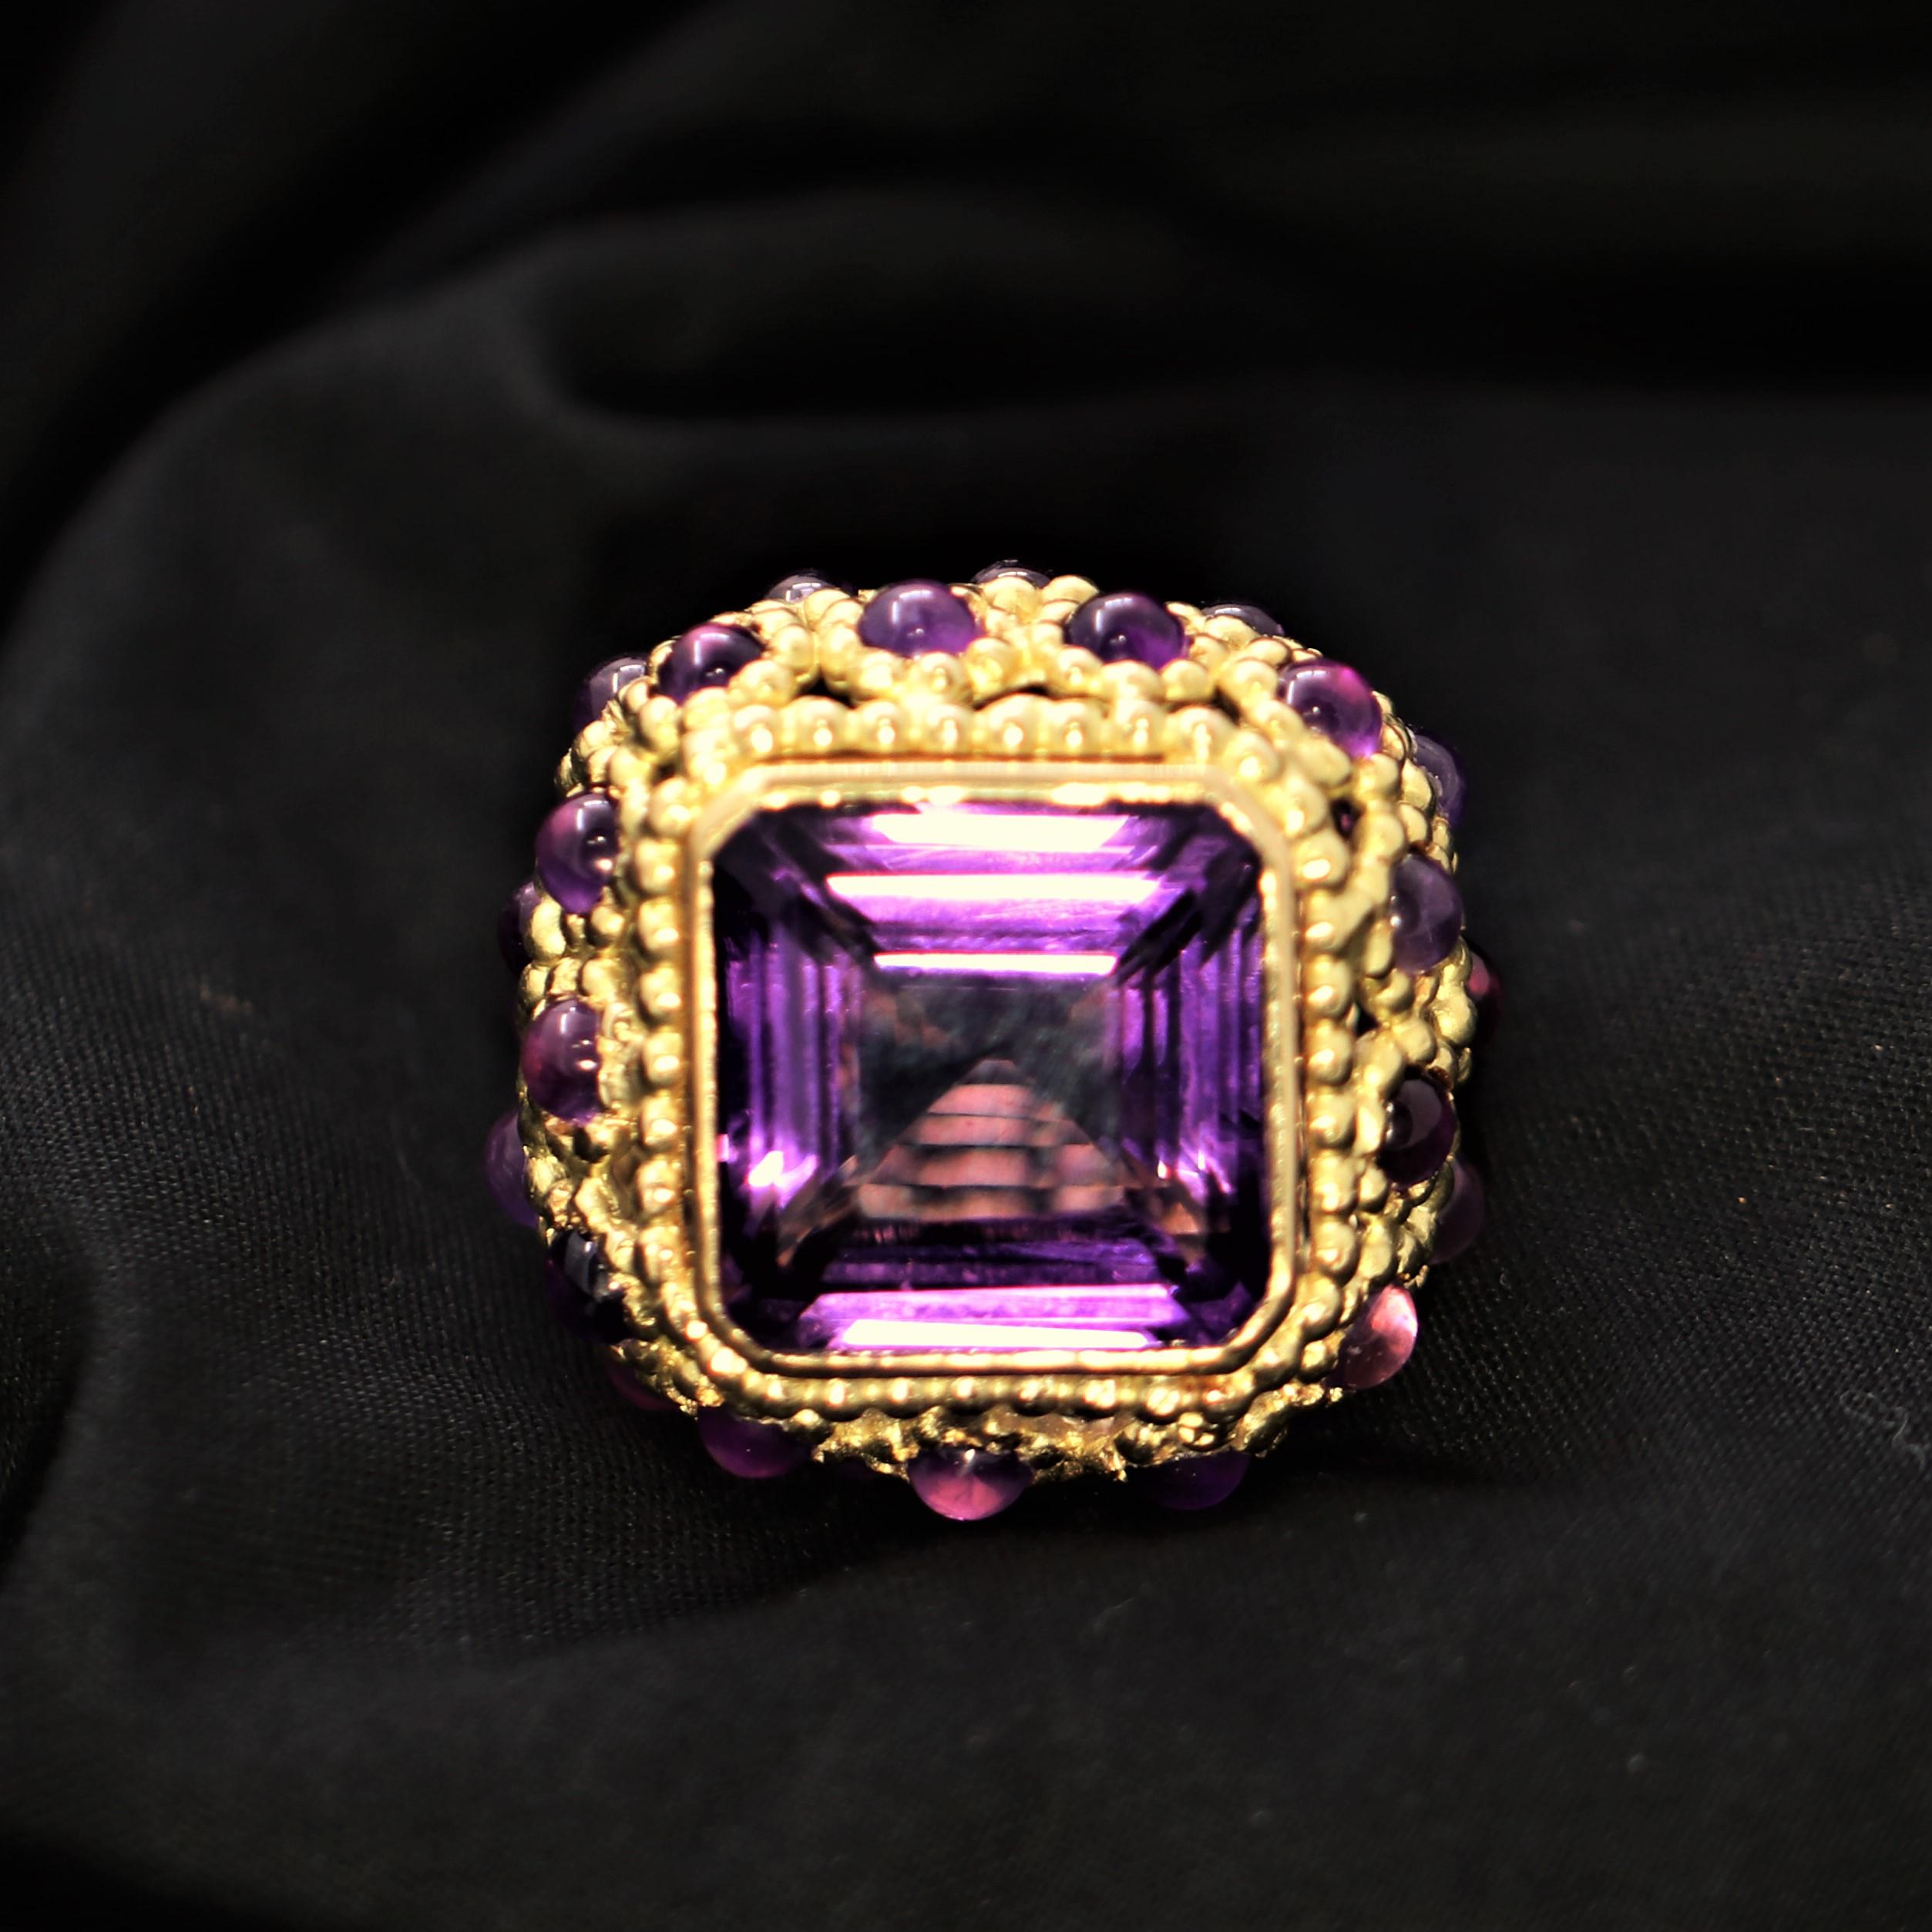 Women's Elegant Grand Scale French Mid-20th Century 18k Gold and Amethyst Fashion Ring For Sale